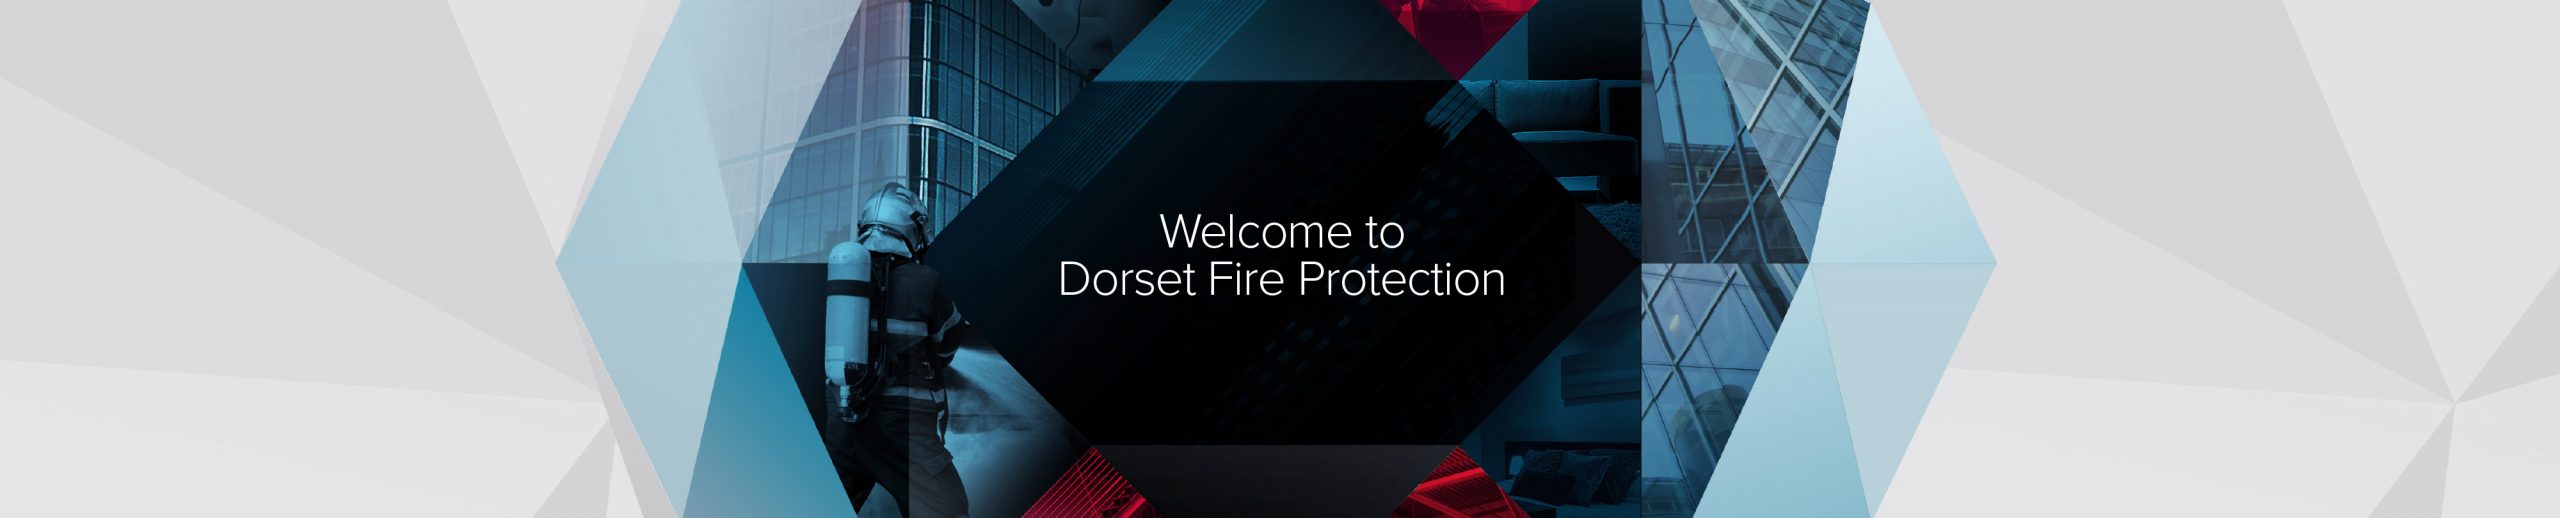 Welcome to Dorset Fire Protection Banner